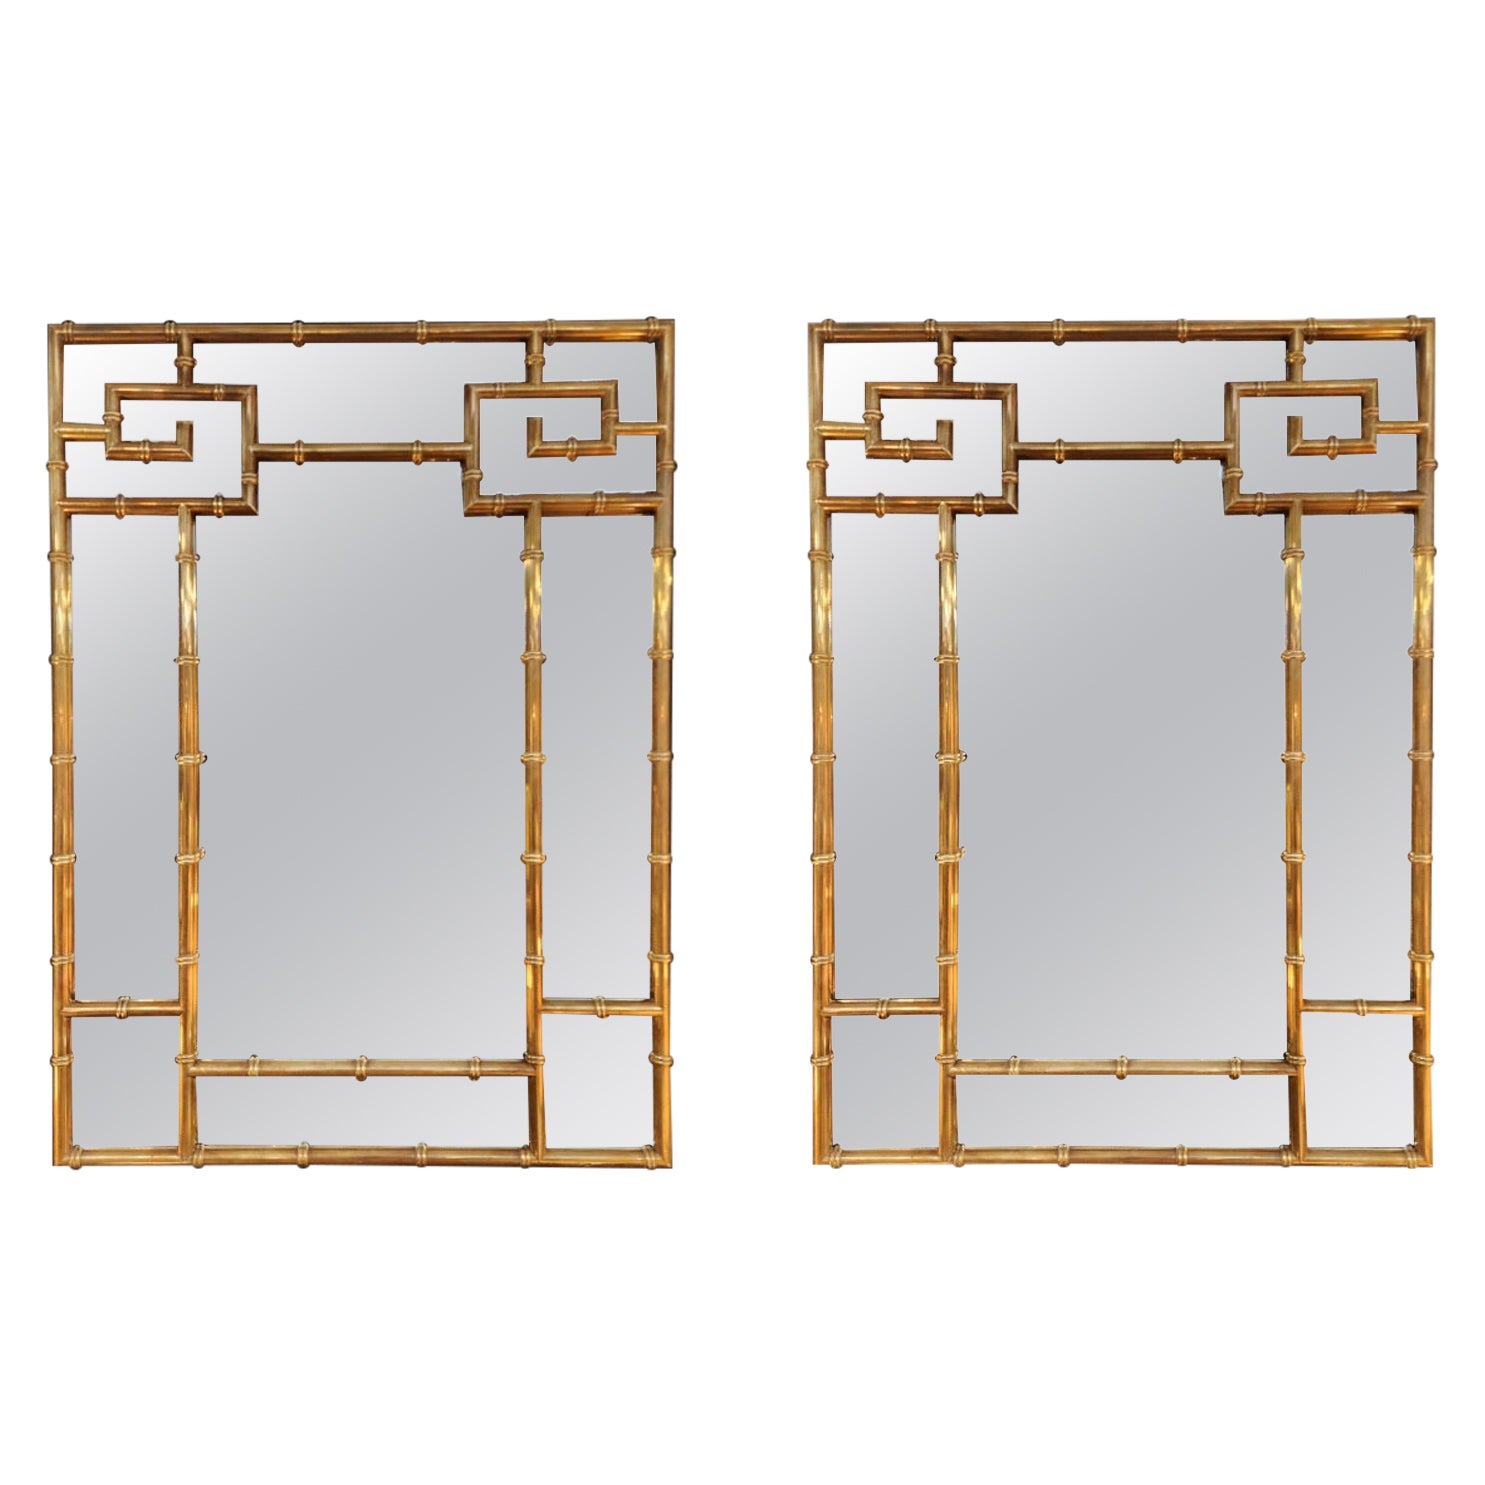 A rare to find, matched pair of brass mirrors by mastercraft. Designed by William Doezema for Mastercraft, and produced in the 1970's.  This pair is in excellent condition and has a gorgeous patina. These are not lacquered and can be polished to a